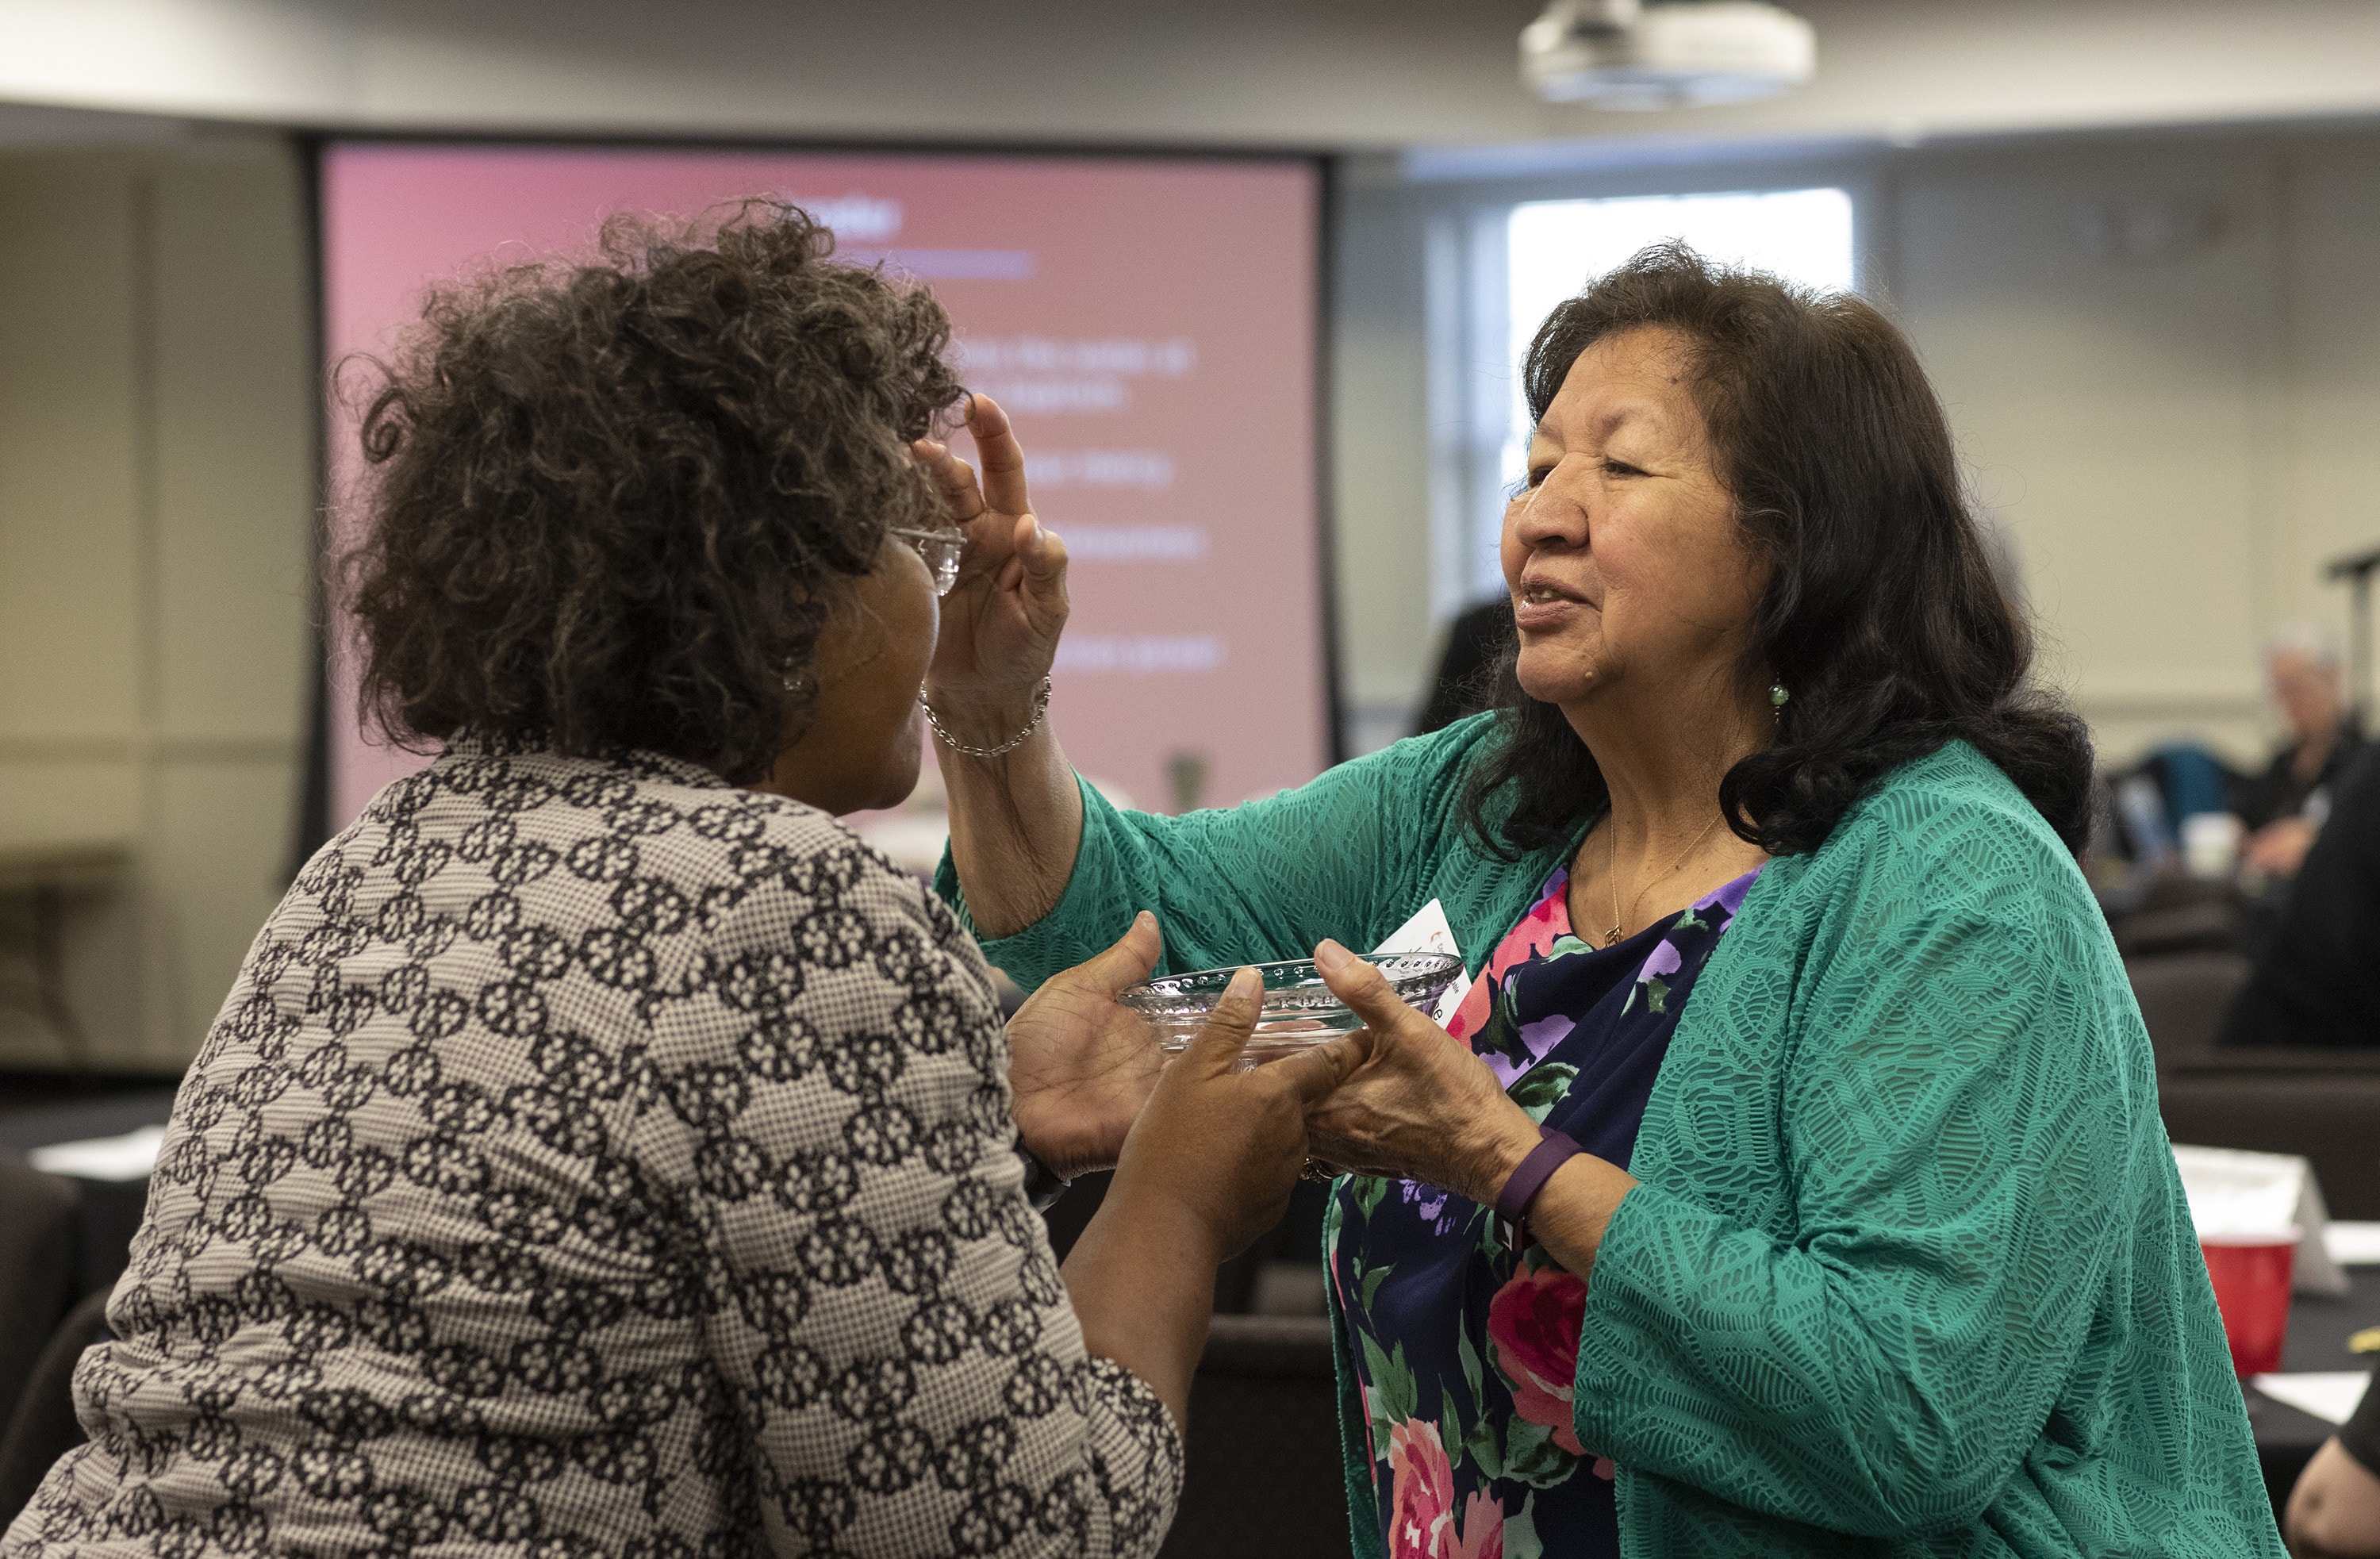 Josephine Deere, right, blesses fellow Connectional Table member Benedita Penicela Nhambiu during a service of baptism remembrance on April 3 at the Connectional Table meeting in Nashville, Tenn. Photo by Kathleen Barry, UMNS.